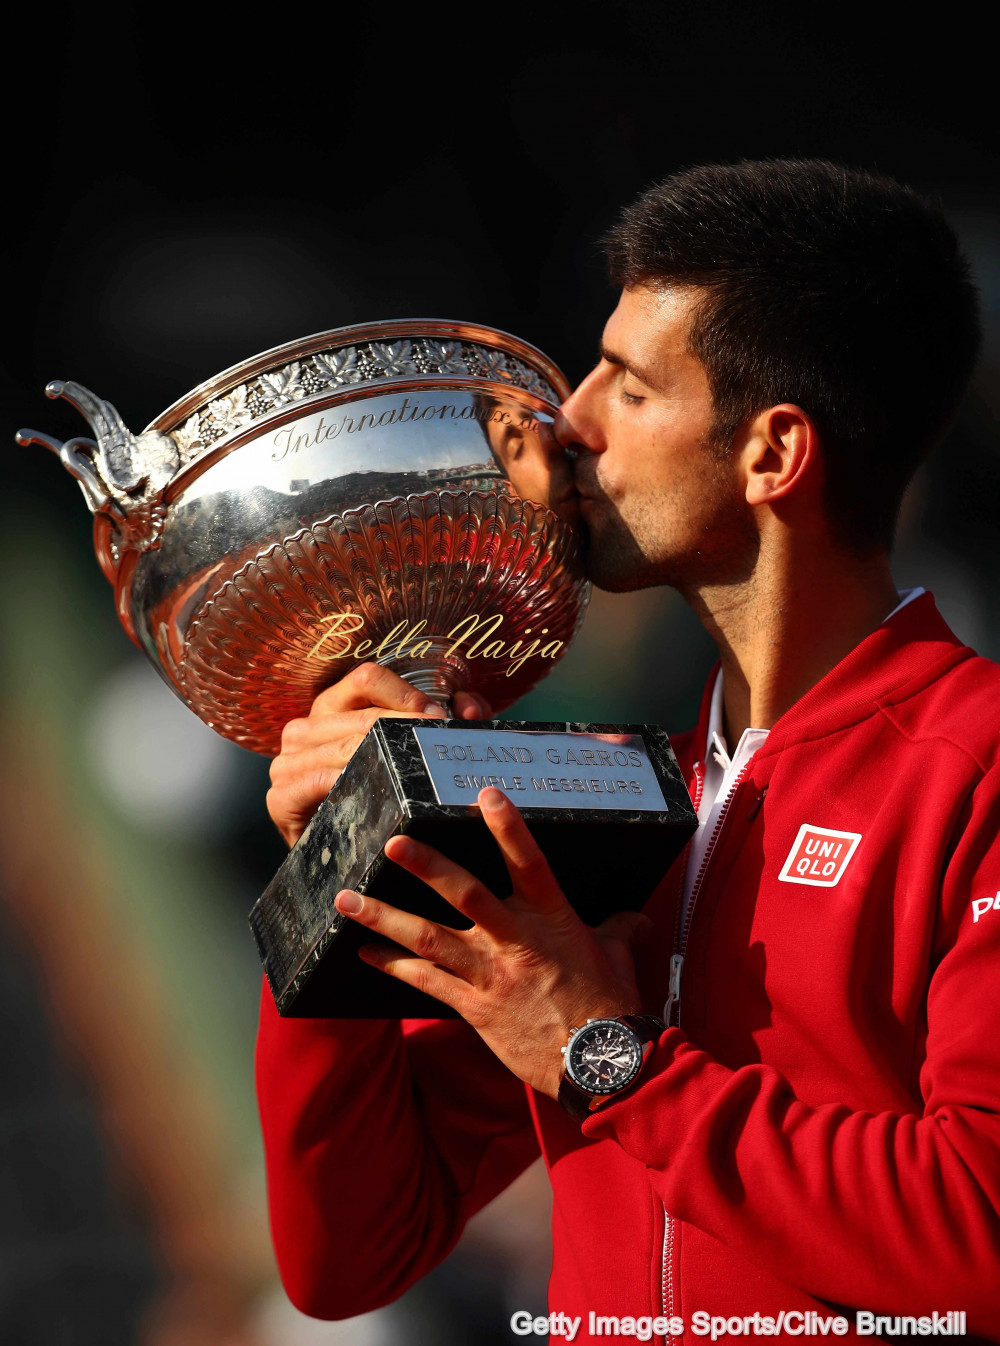 Novak Djokovic Beats Andy Murray to Win His First French Open Title!  Becomes First Man in 47 Years to Hold Four Grand Slam Titles Concurrently |  BellaNaija